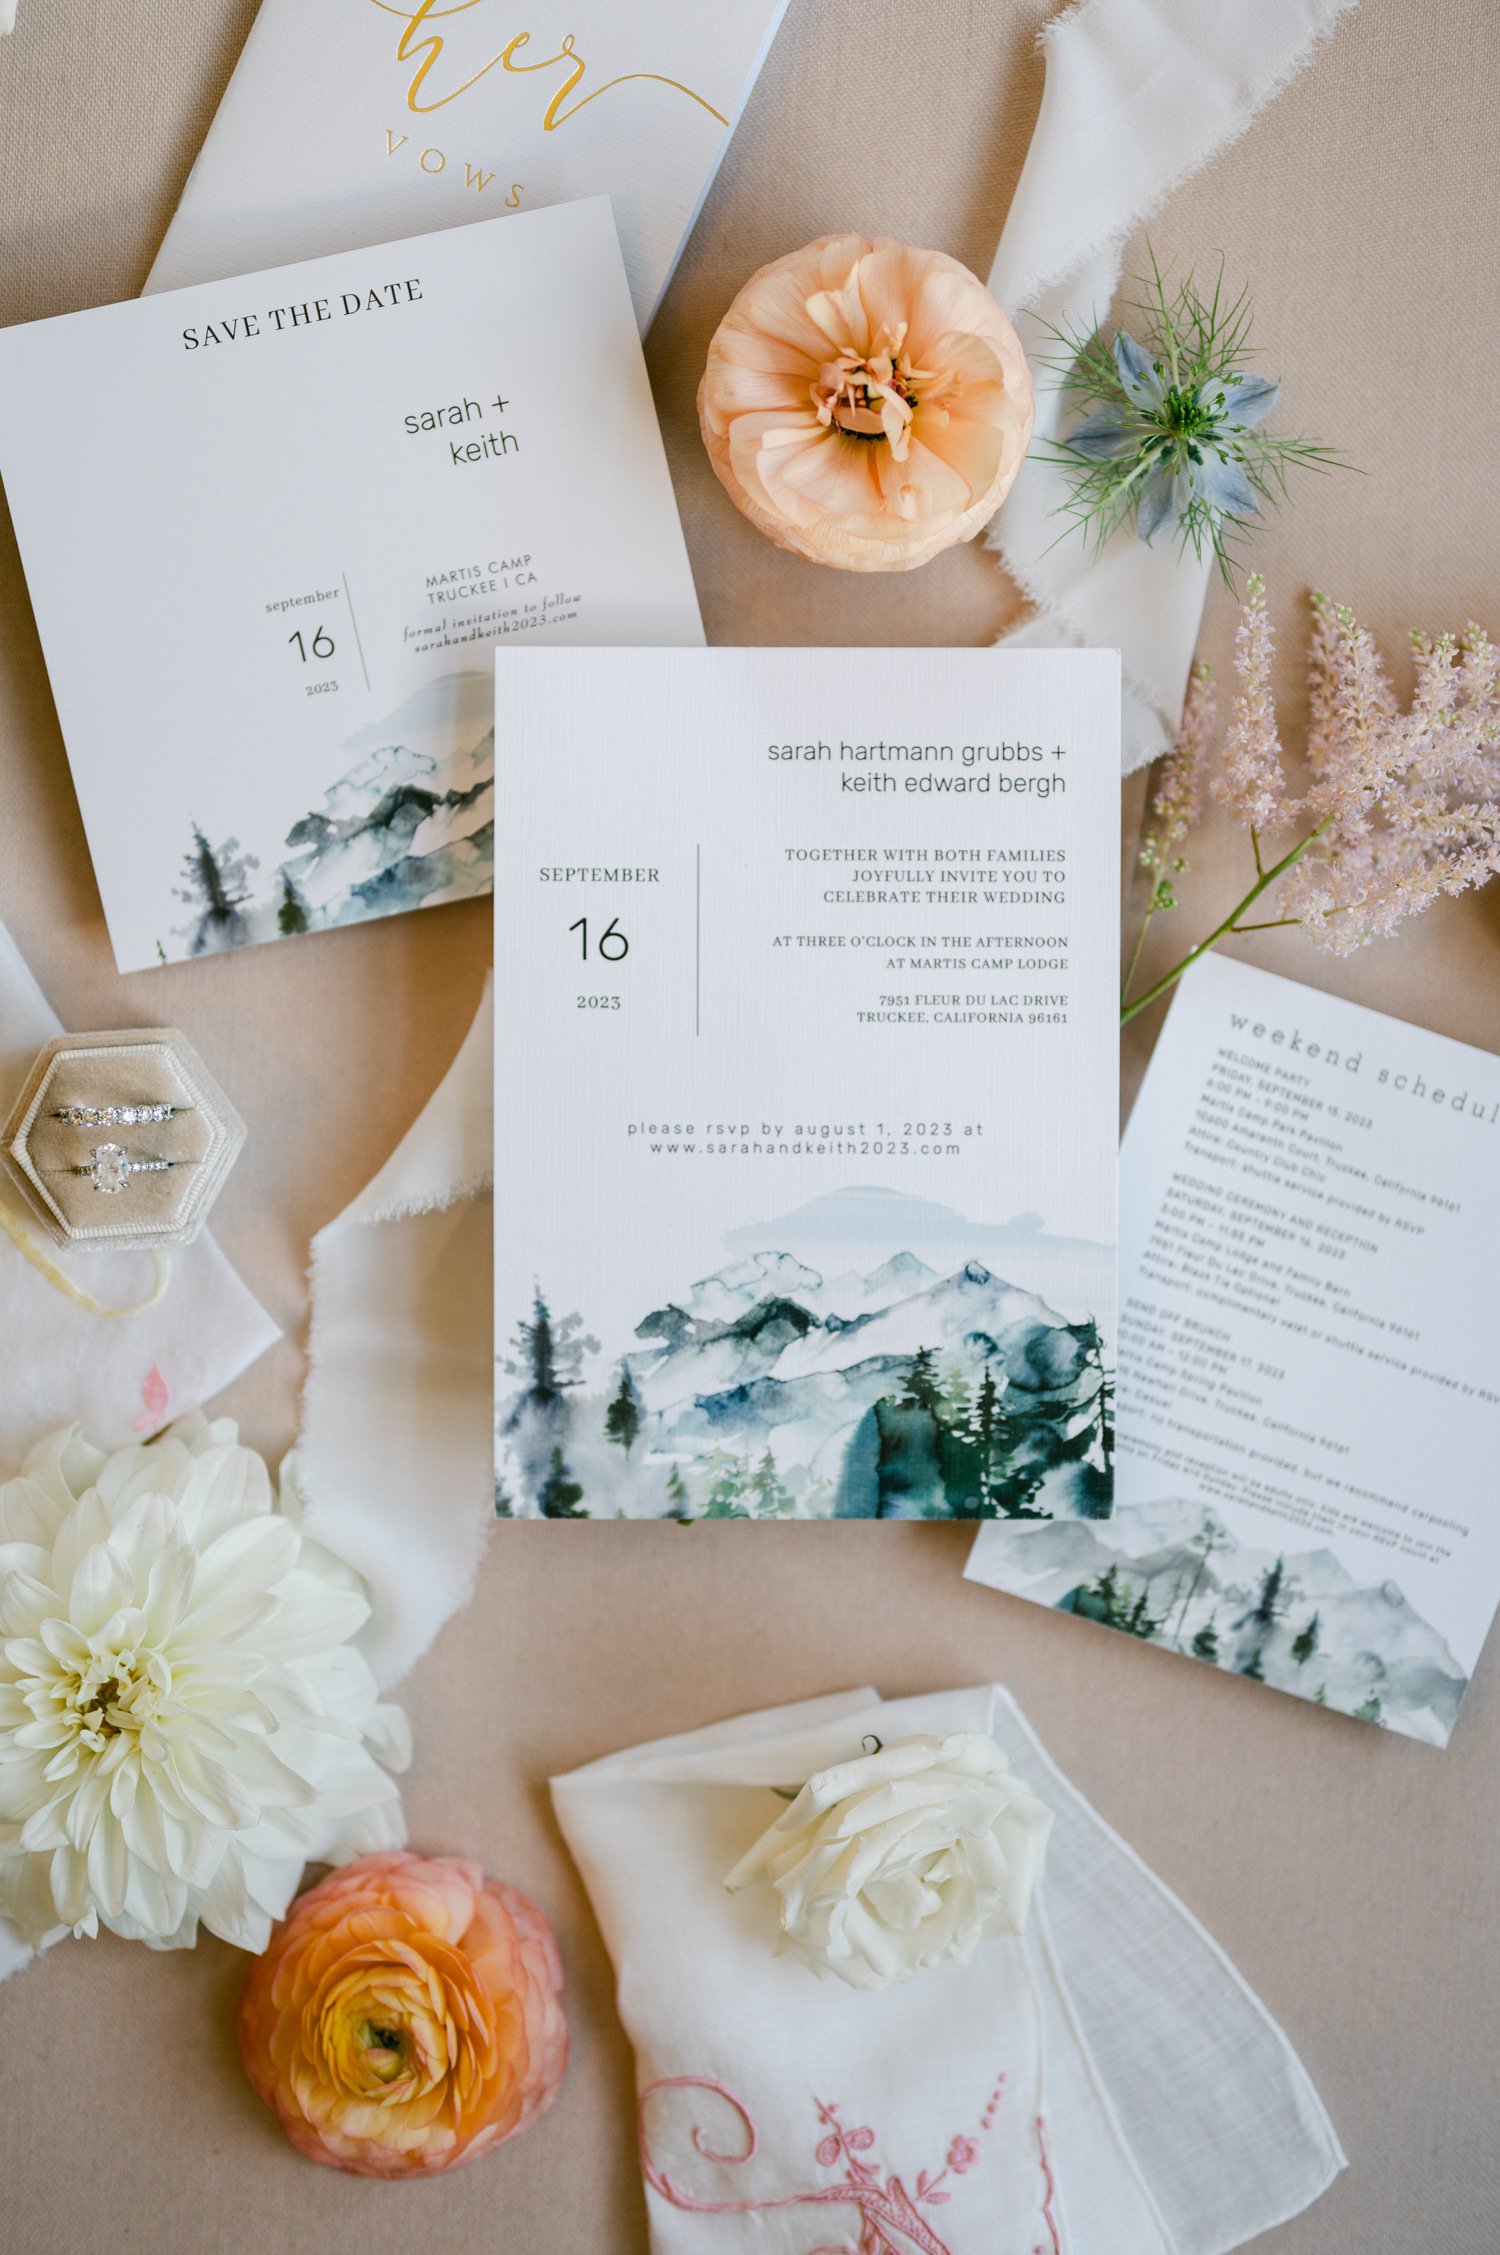 Martis Camp Wedding, photo of the wedding invitation with a mountain landscape design, wedding rings, and flowers